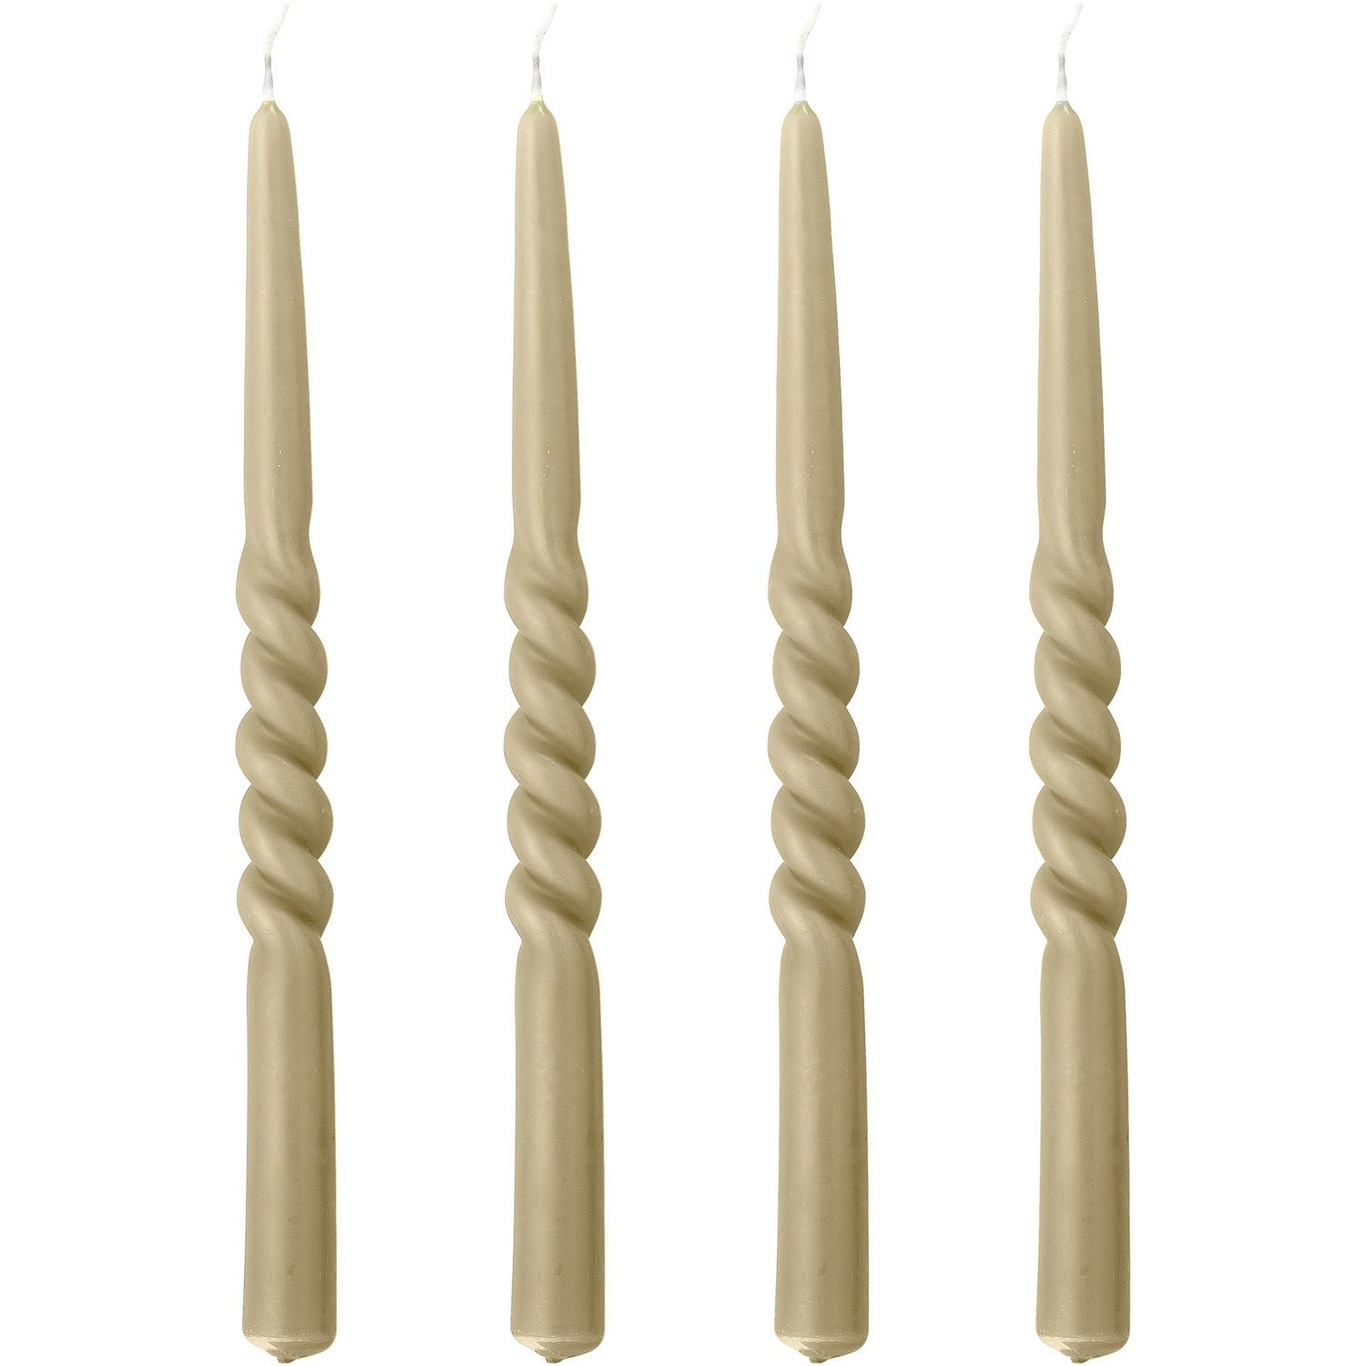 https://royaldesign.com/image/2/bloomingville-twist-candle-nature-parafin-0?w=800&quality=80